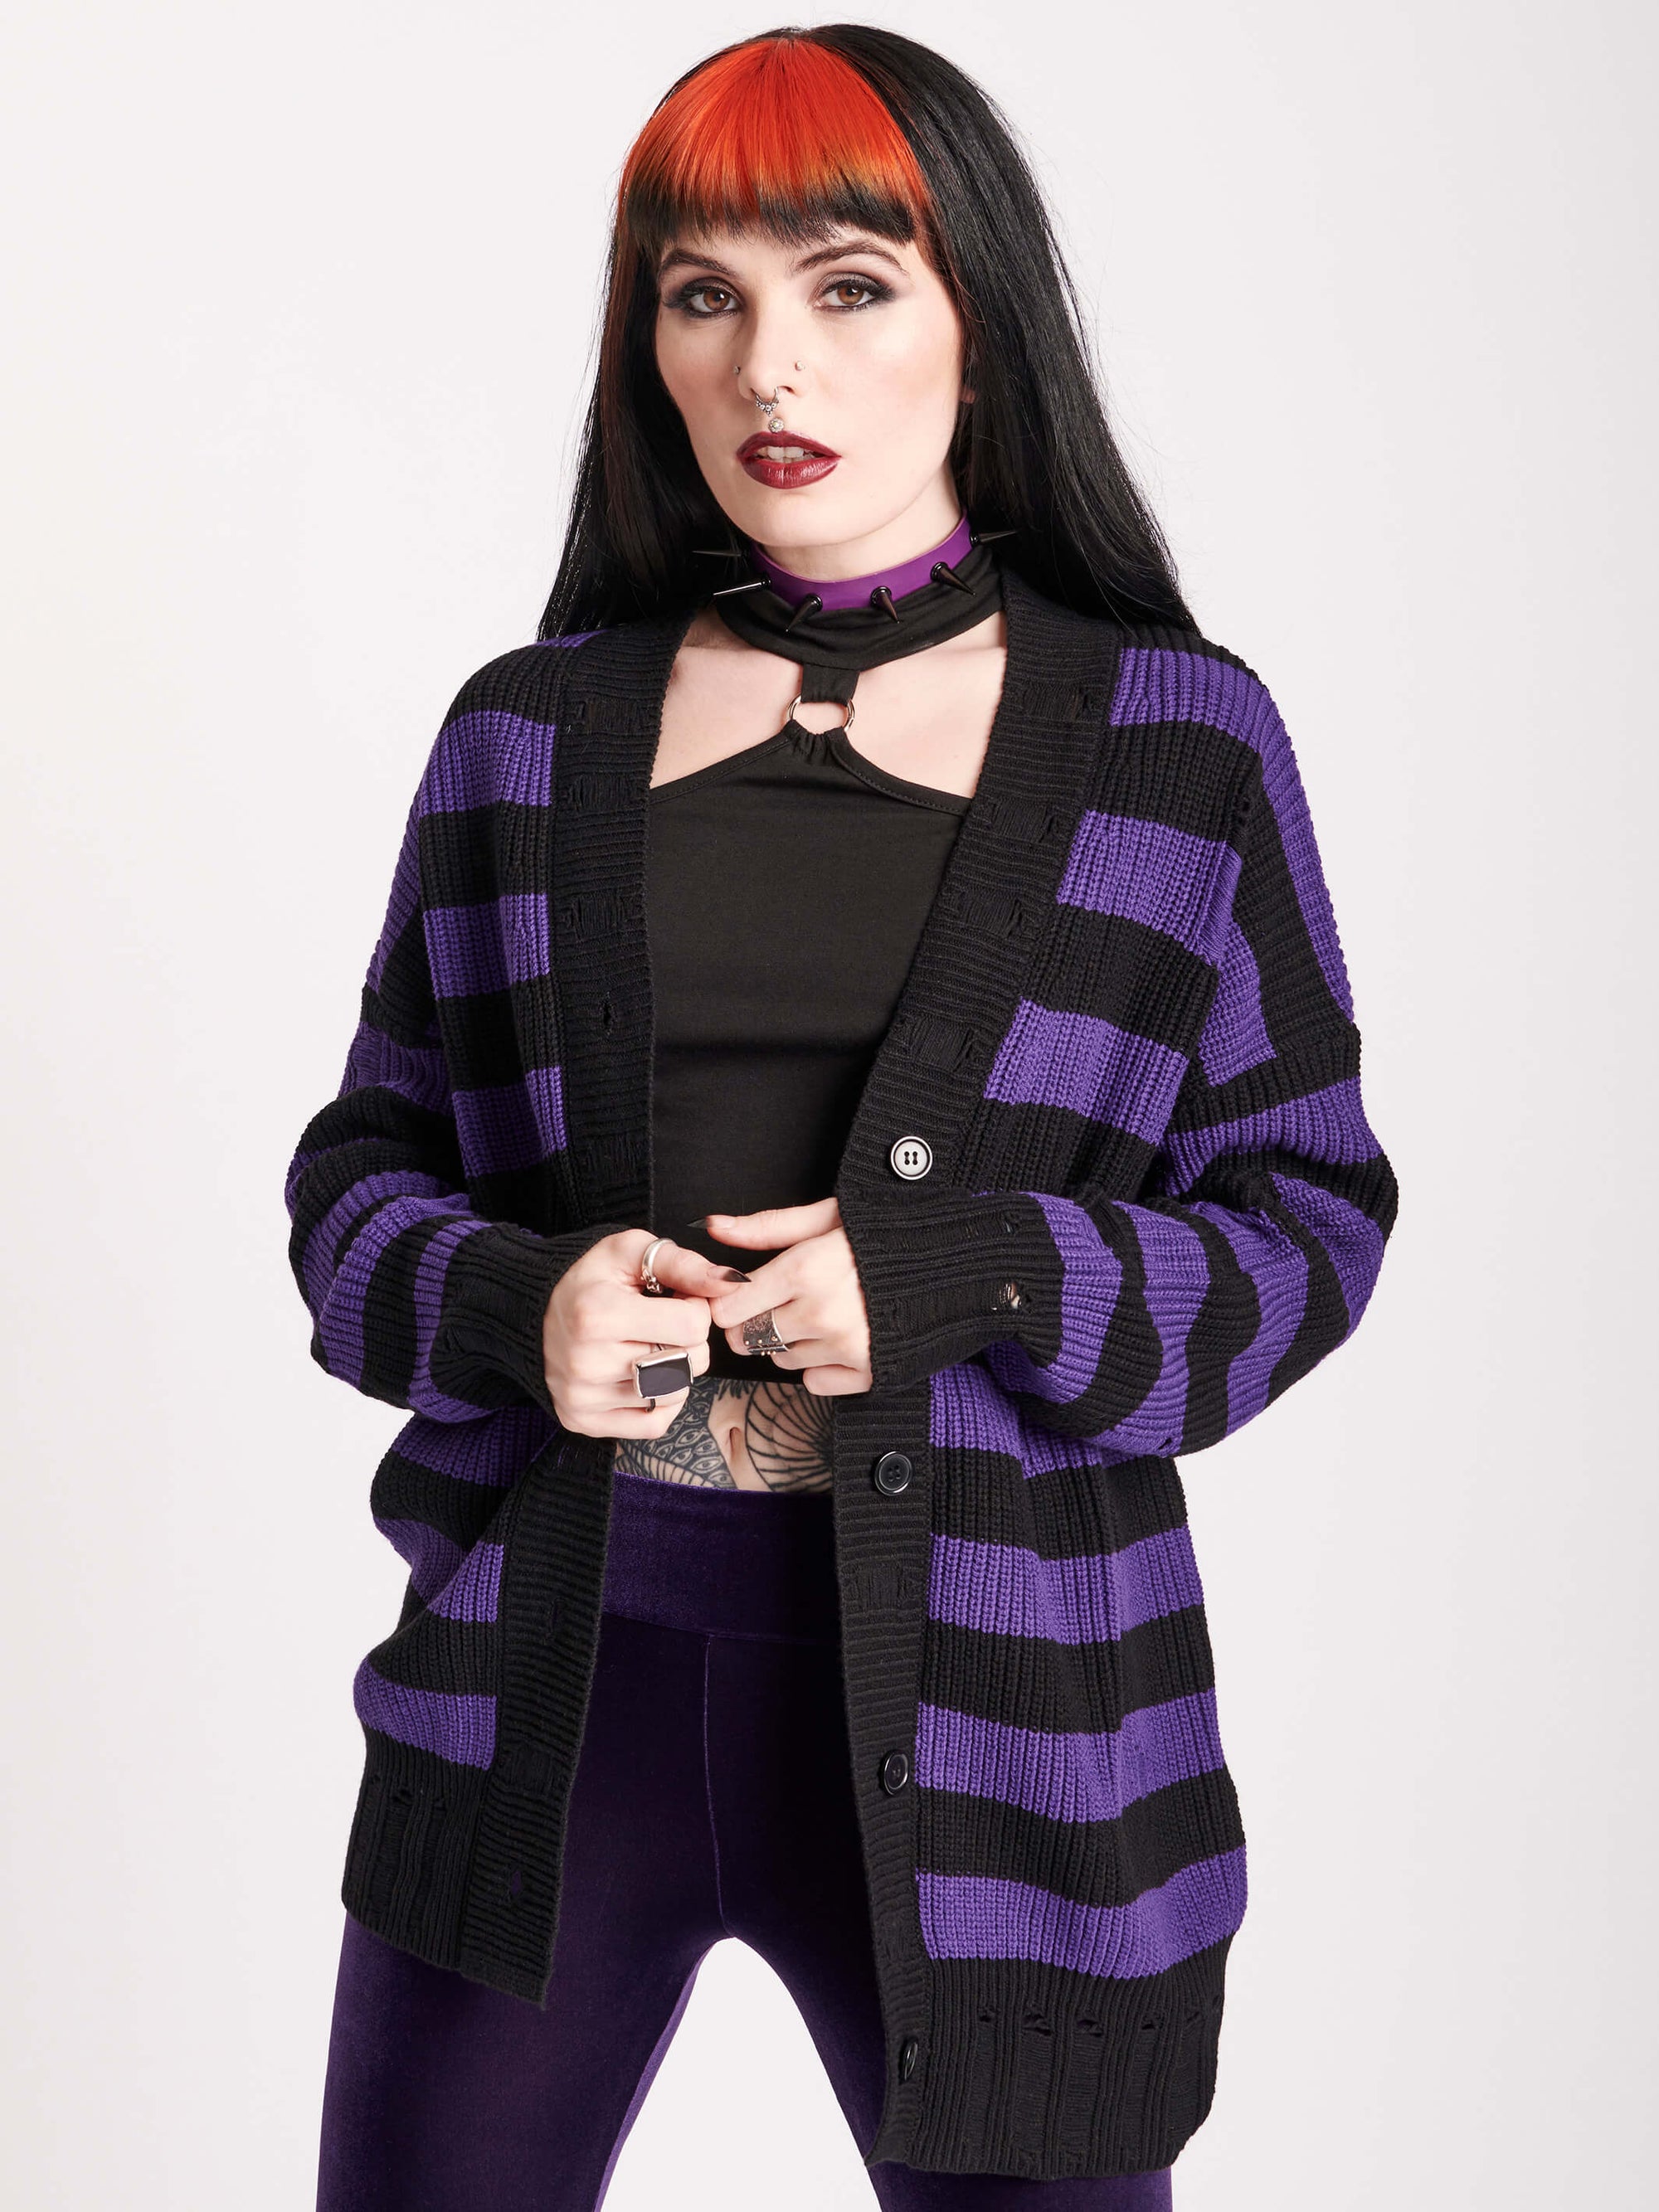 purple and black stiped cardigan with drop stitch details throughout